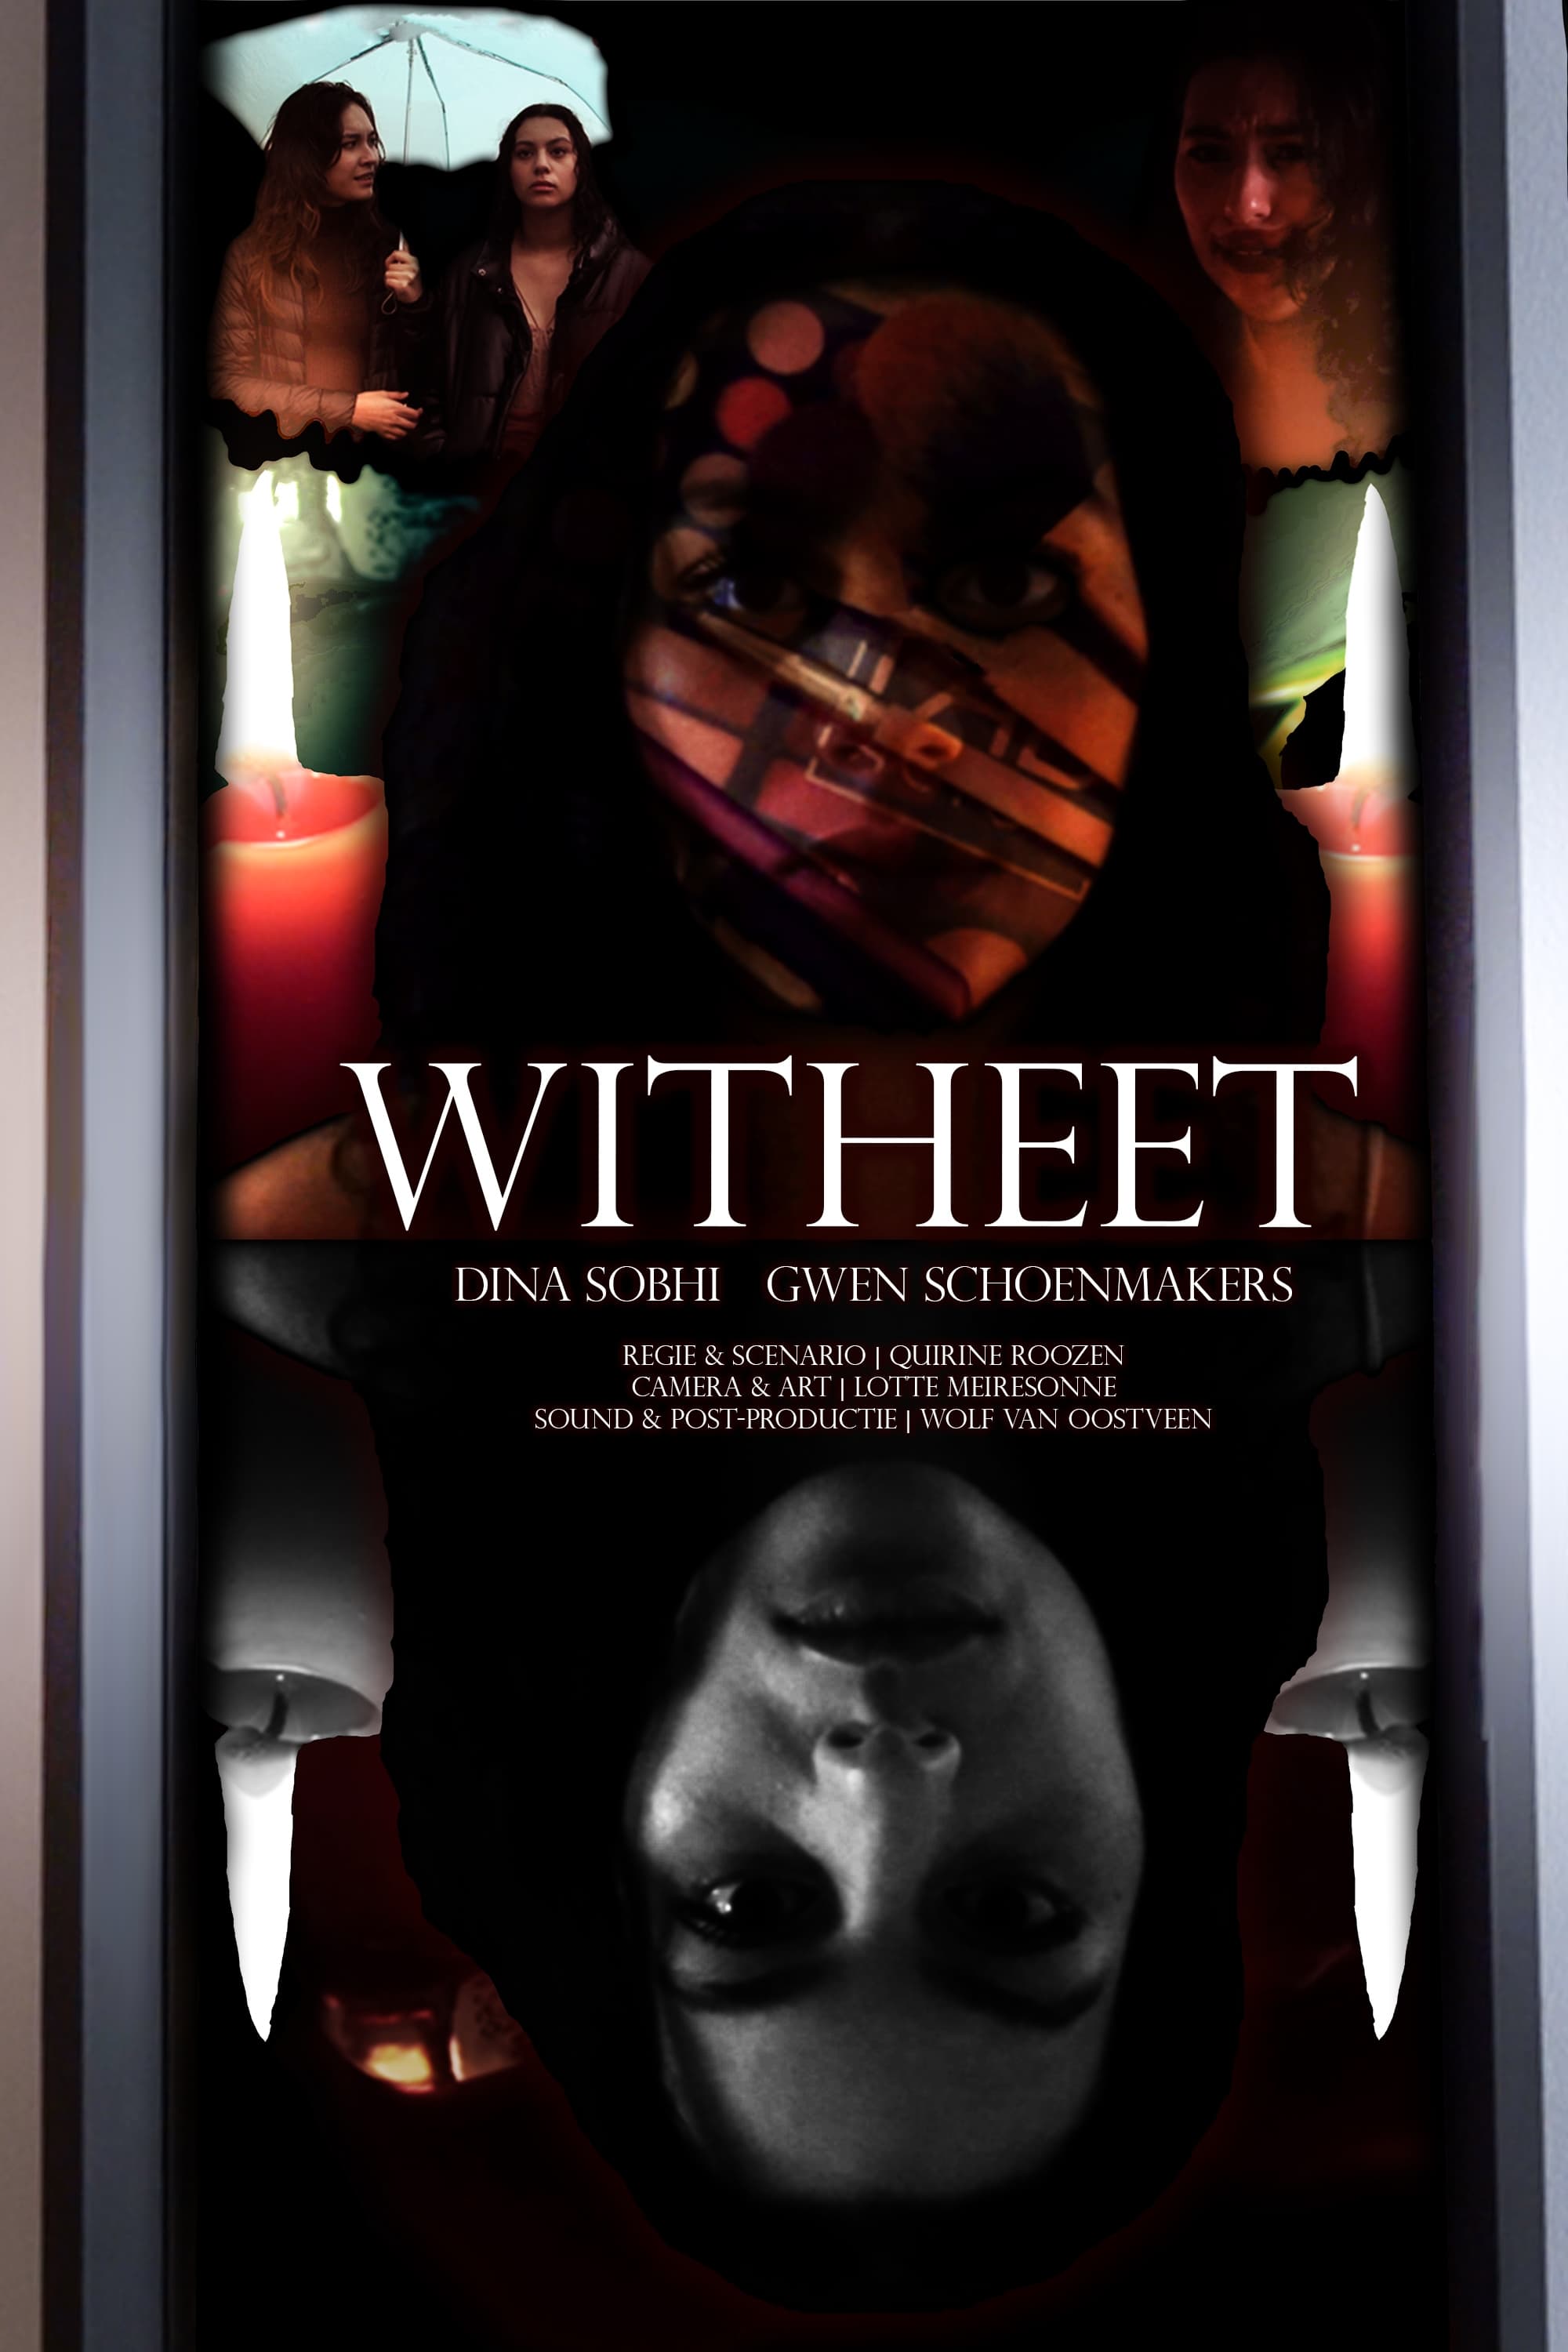 Witheet